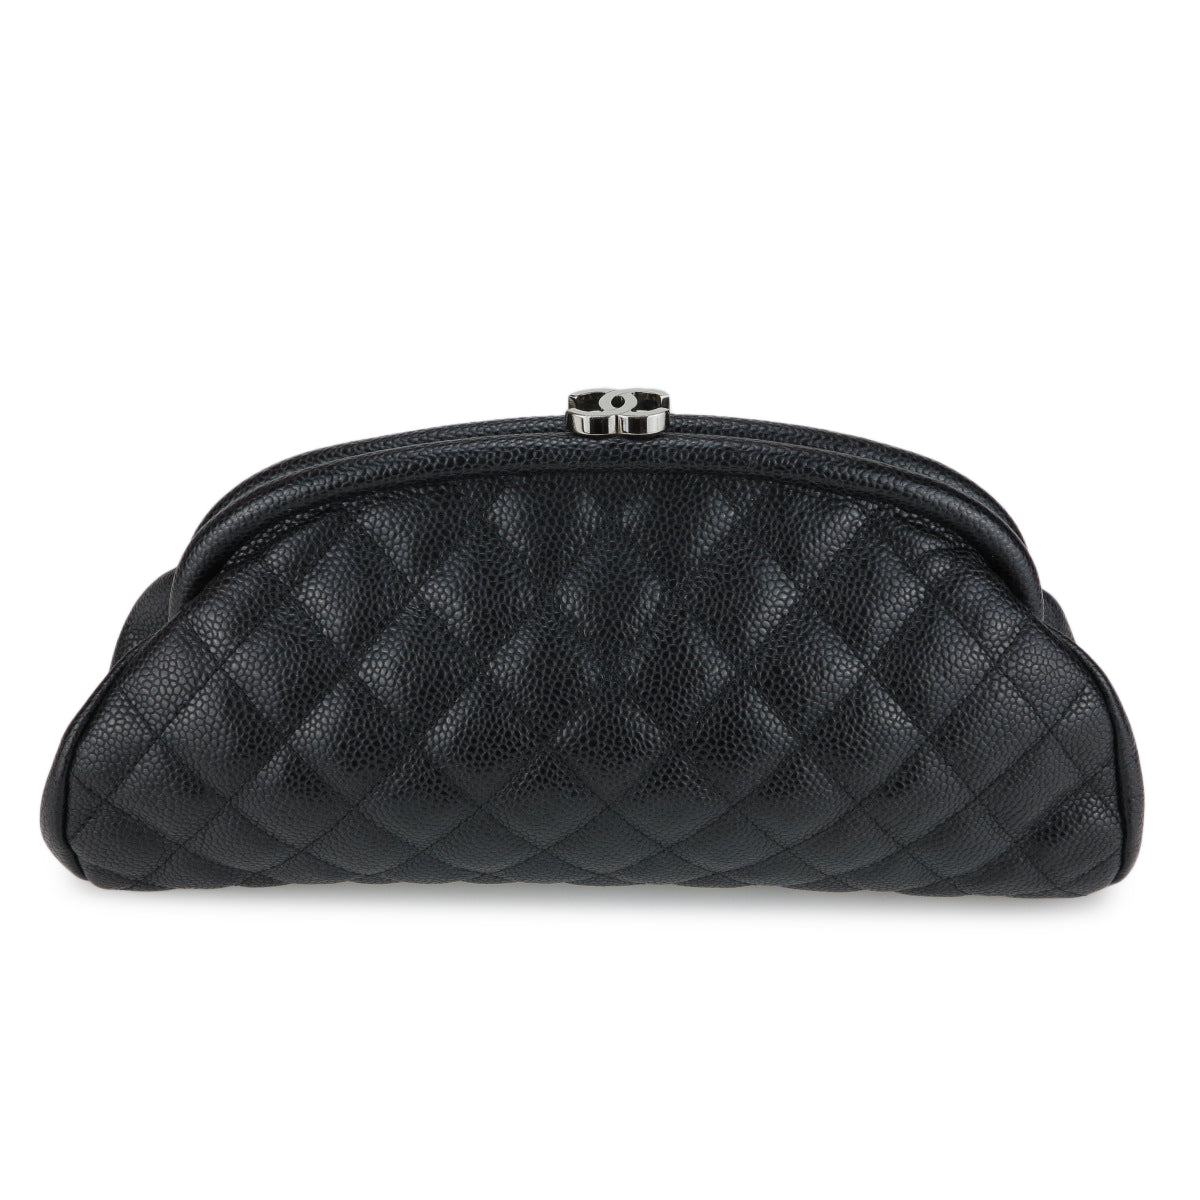 Chanel Timeless CC Key Pouch - Black Keychains, Accessories - CHA950211